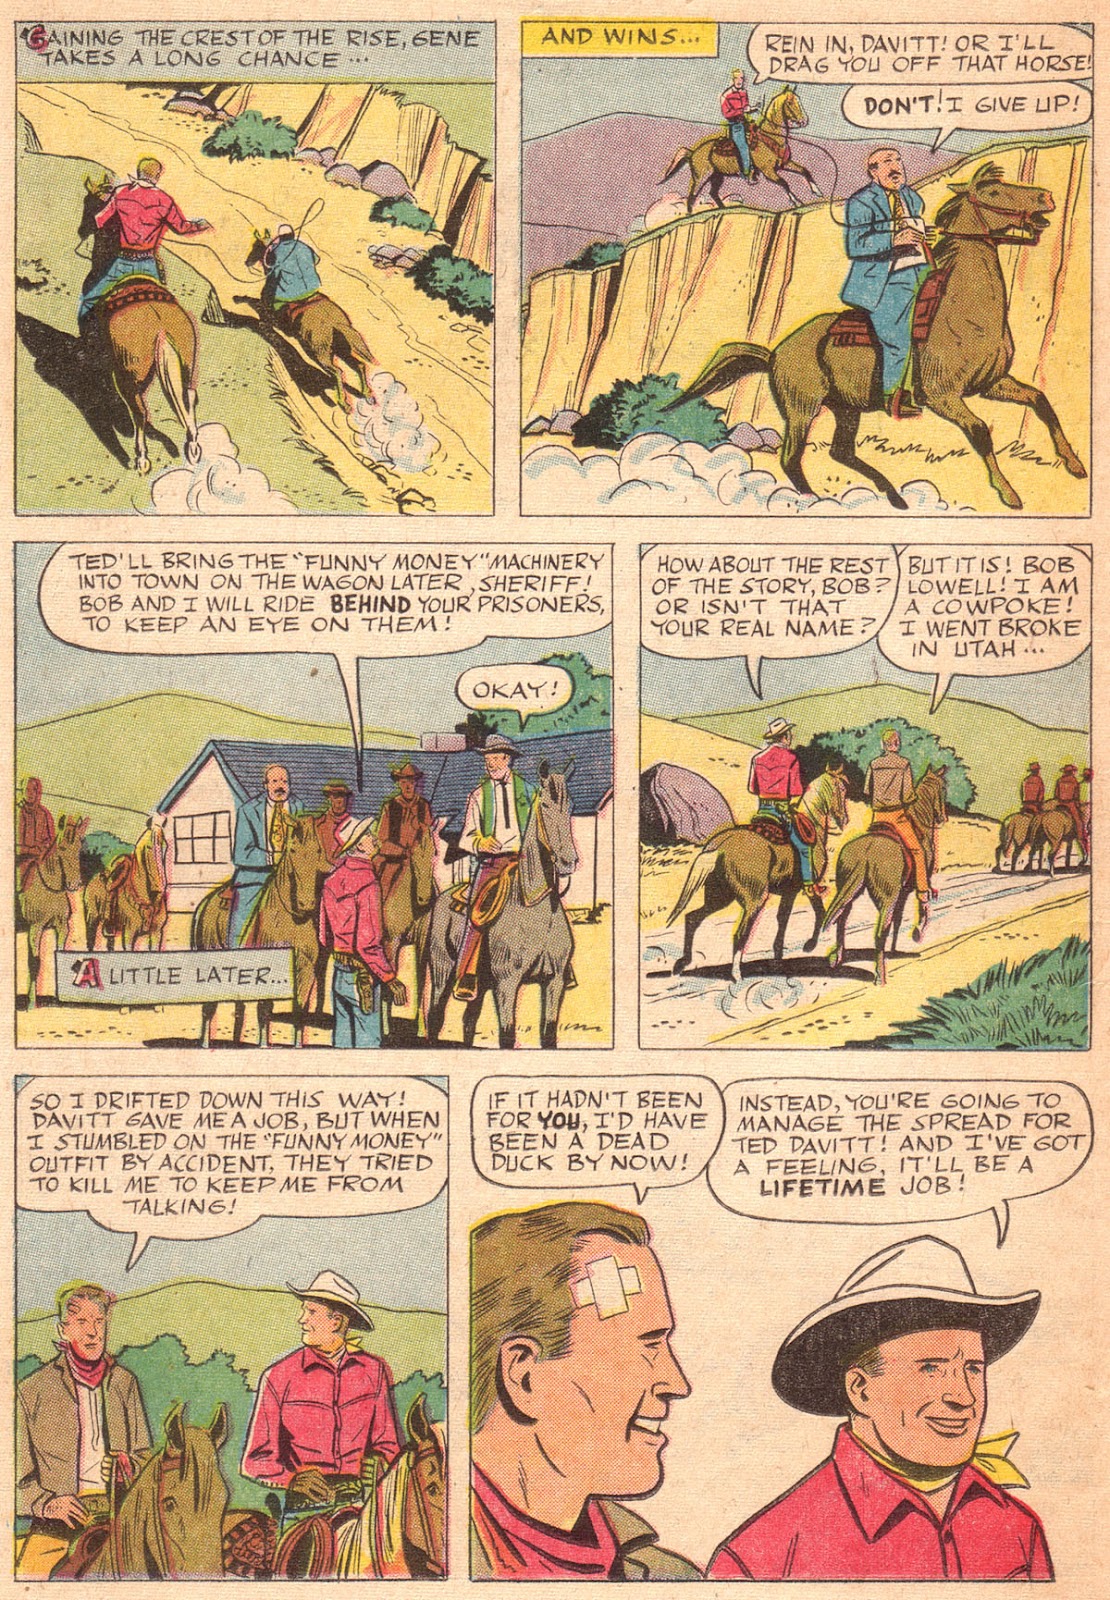 Gene Autry Comics (1946) issue 94 - Page 26